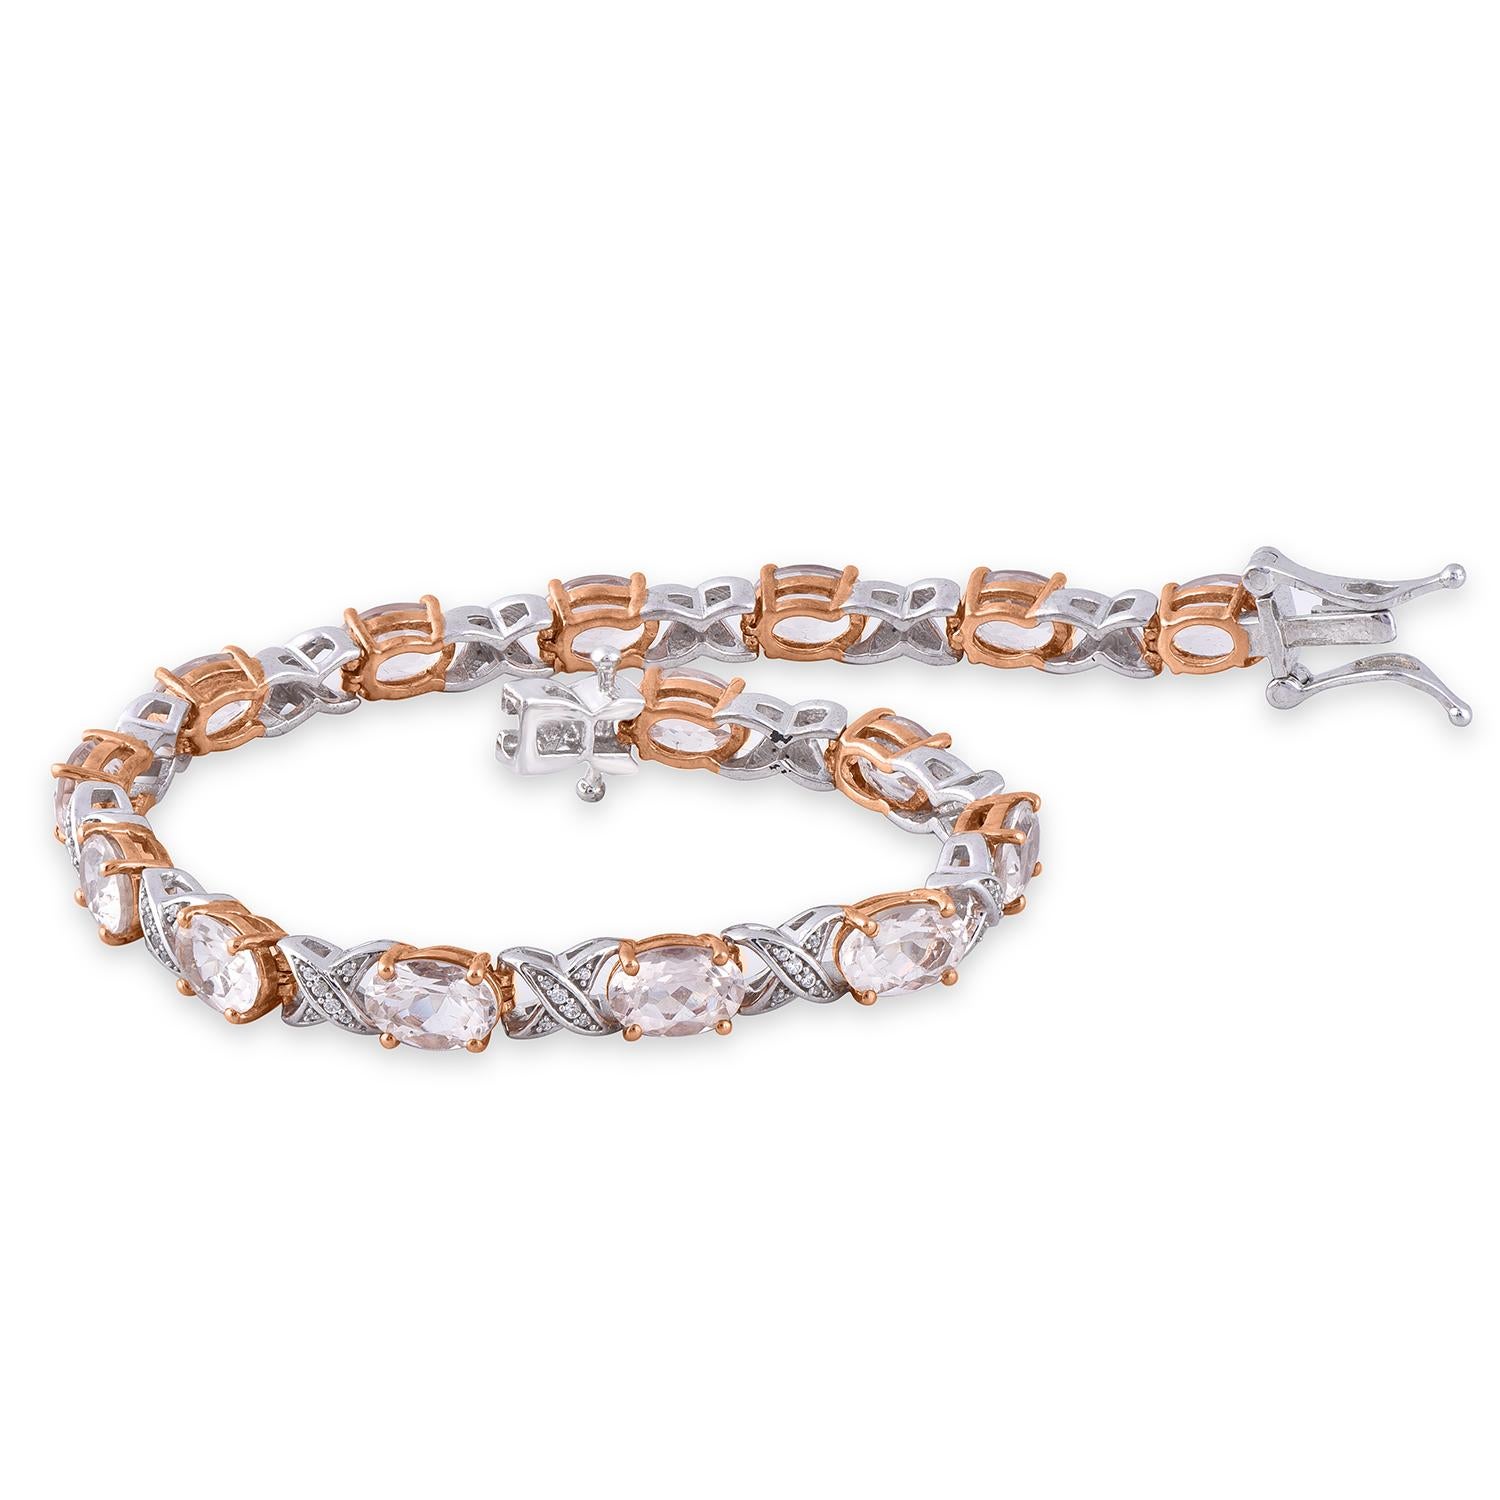 A graceful addition to her wardrobe, this diamond frame bracelet brings the perfect touch of sparkle to her look. Made by our inhouse experts in 14 karat Rose gold and studded with 90 round diamond and 15 Oval cut 7 x 5 mm Morganite Gemstones in